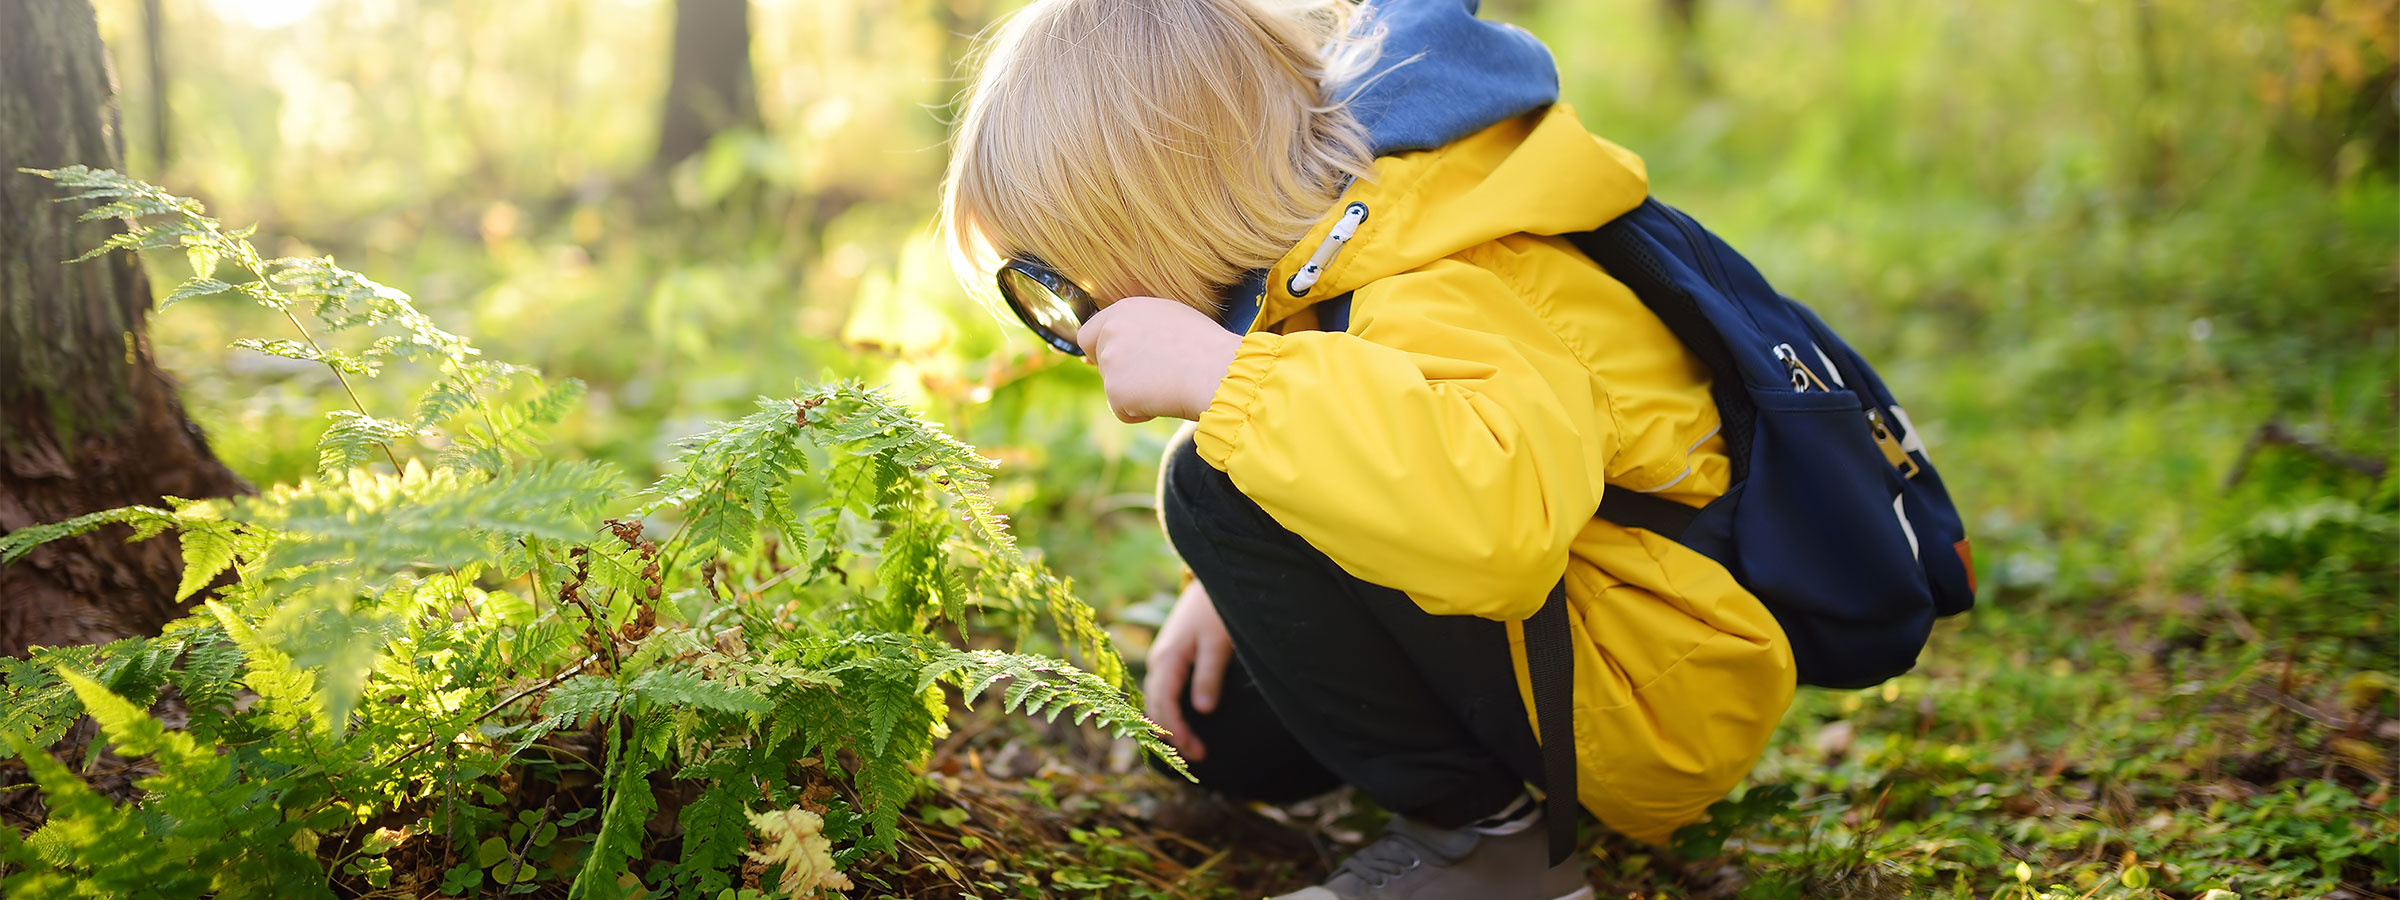 One Marketing - Client Nature Canada - Young blonde haired boy wearing a yellow rain jacket bent down looking at a fern with a magnifying glass.